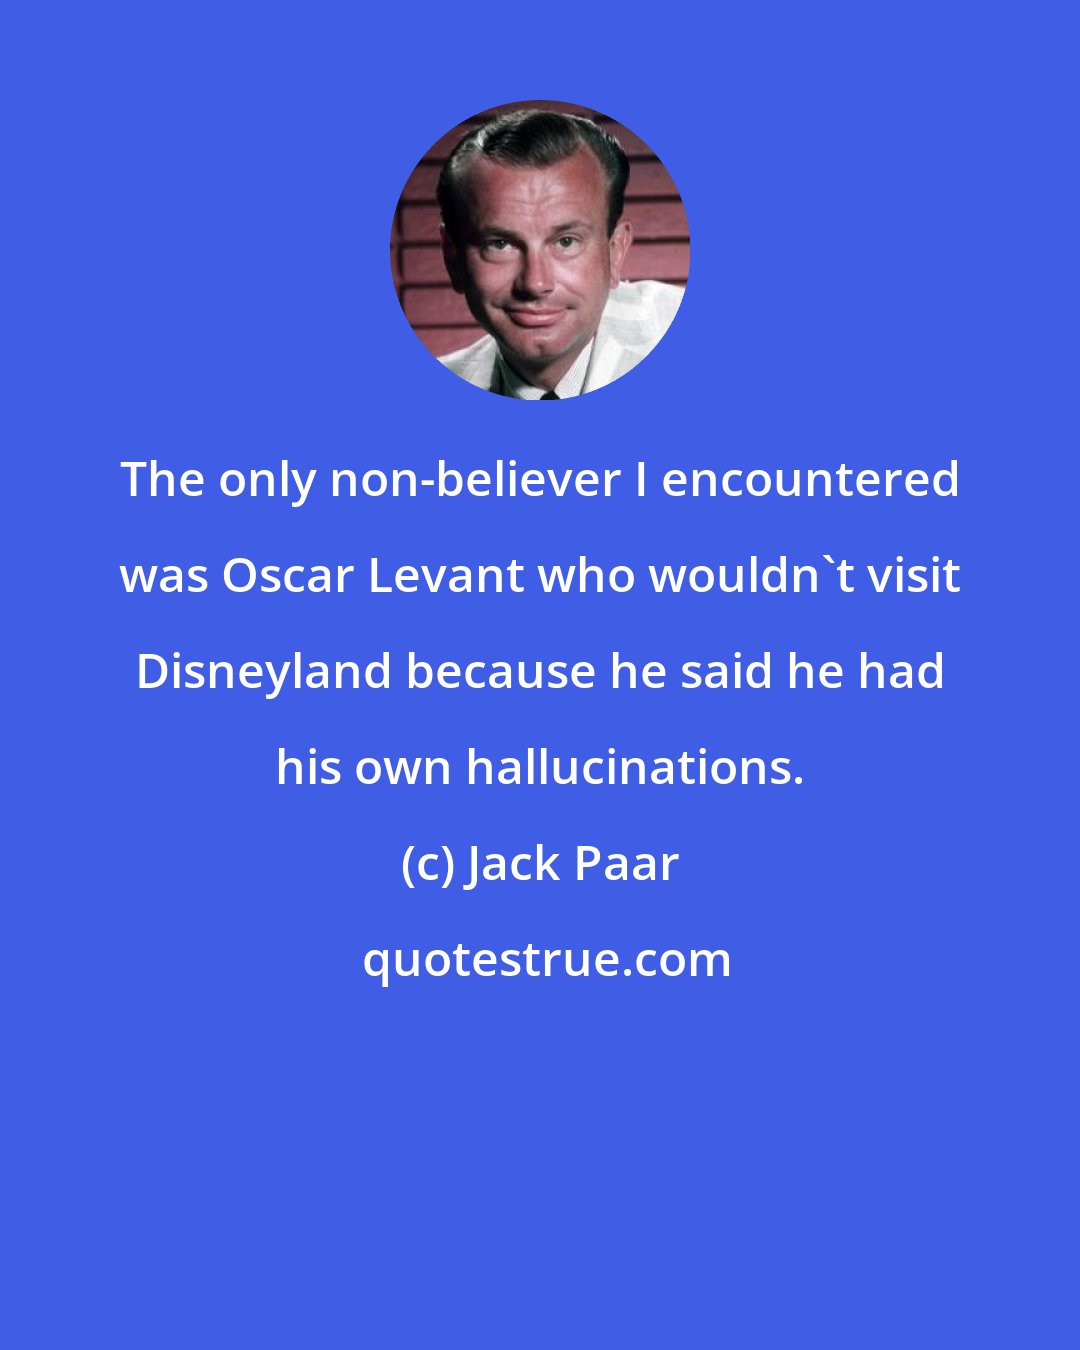 Jack Paar: The only non-believer I encountered was Oscar Levant who wouldn't visit Disneyland because he said he had his own hallucinations.